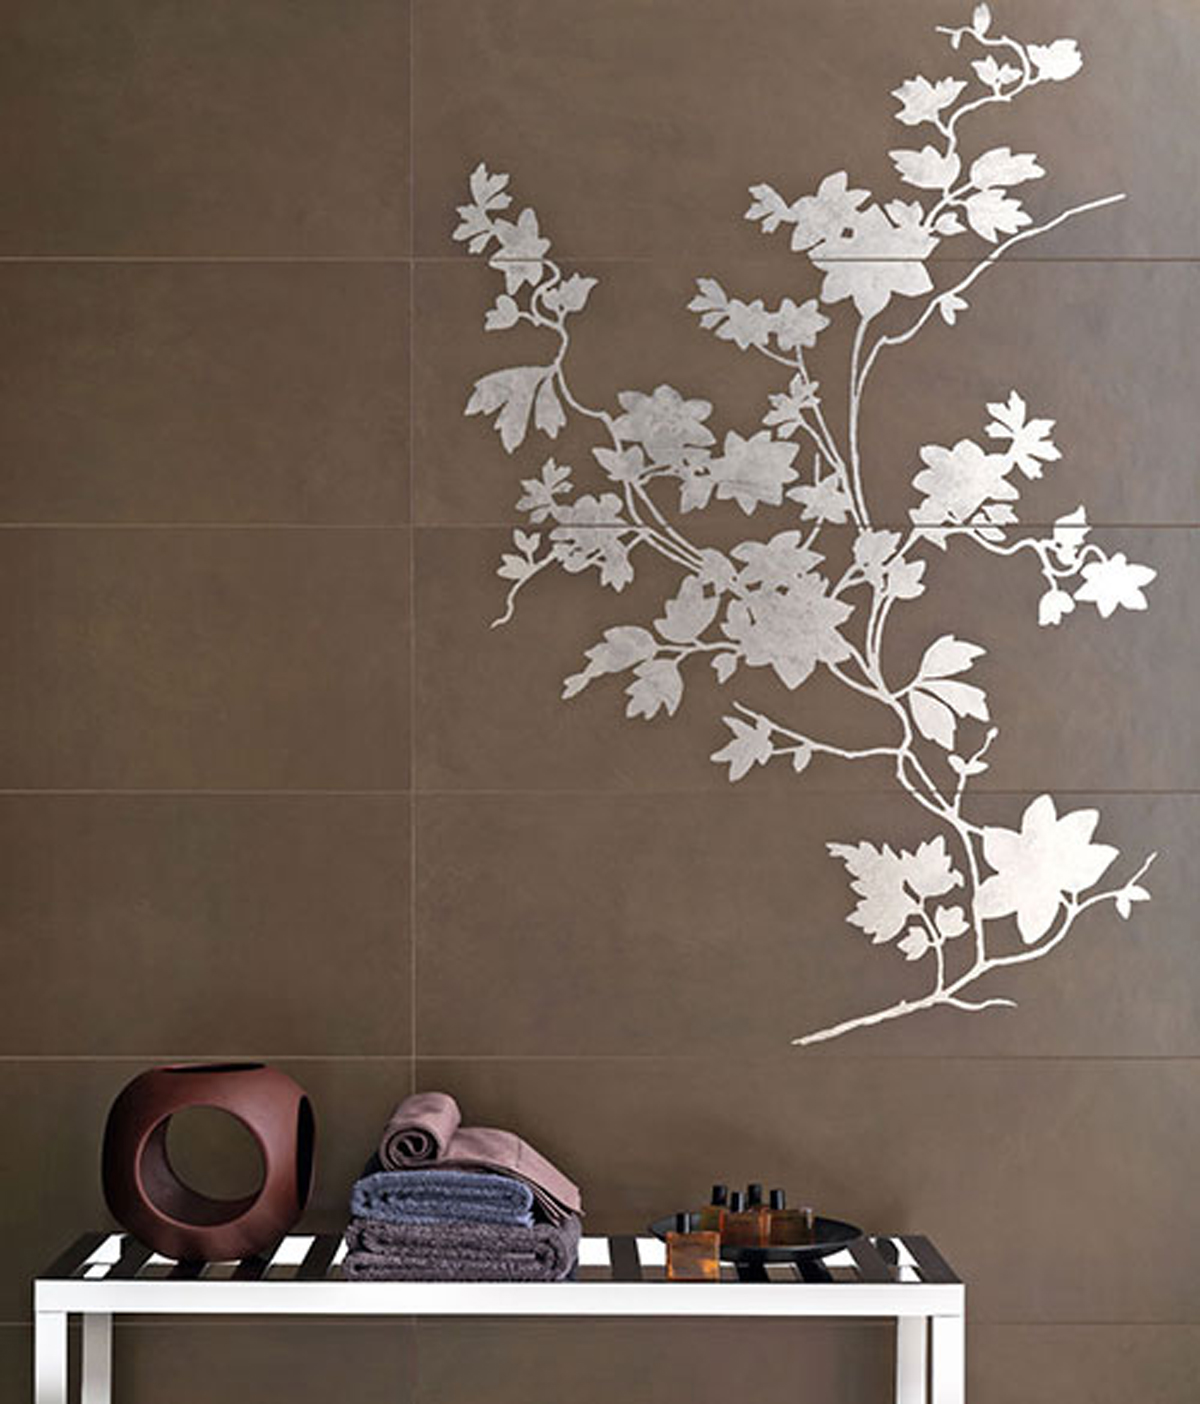 Floral Tile Wallpaper Ideas One Of Total Pictures